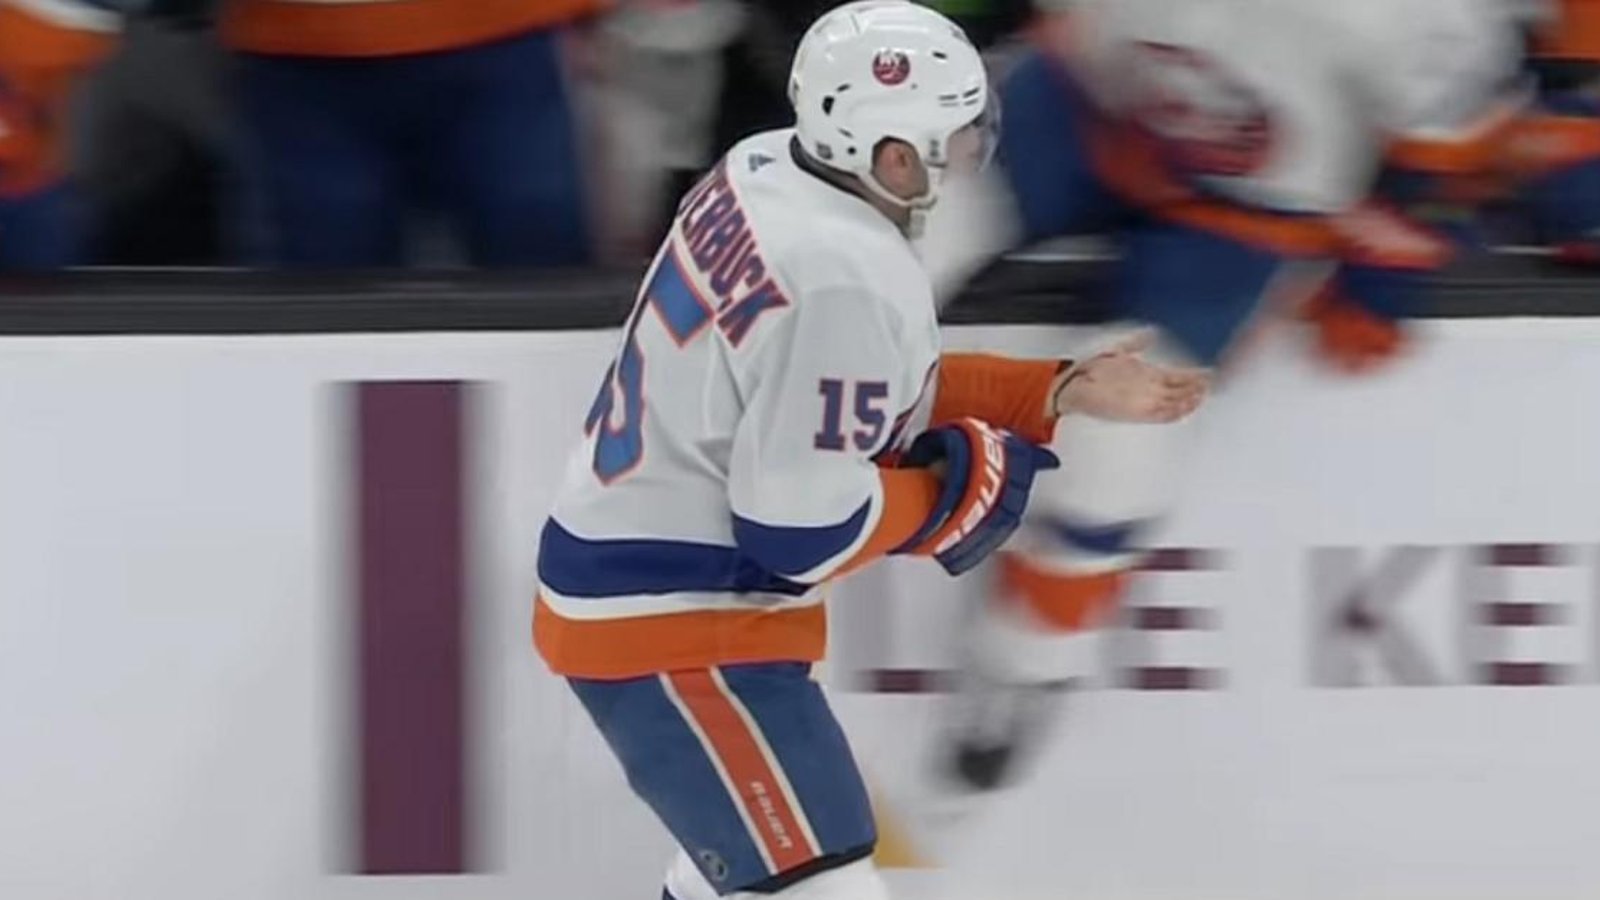 Islanders confirm Cal Clutterbuck seriously injured after being cut by a skate.